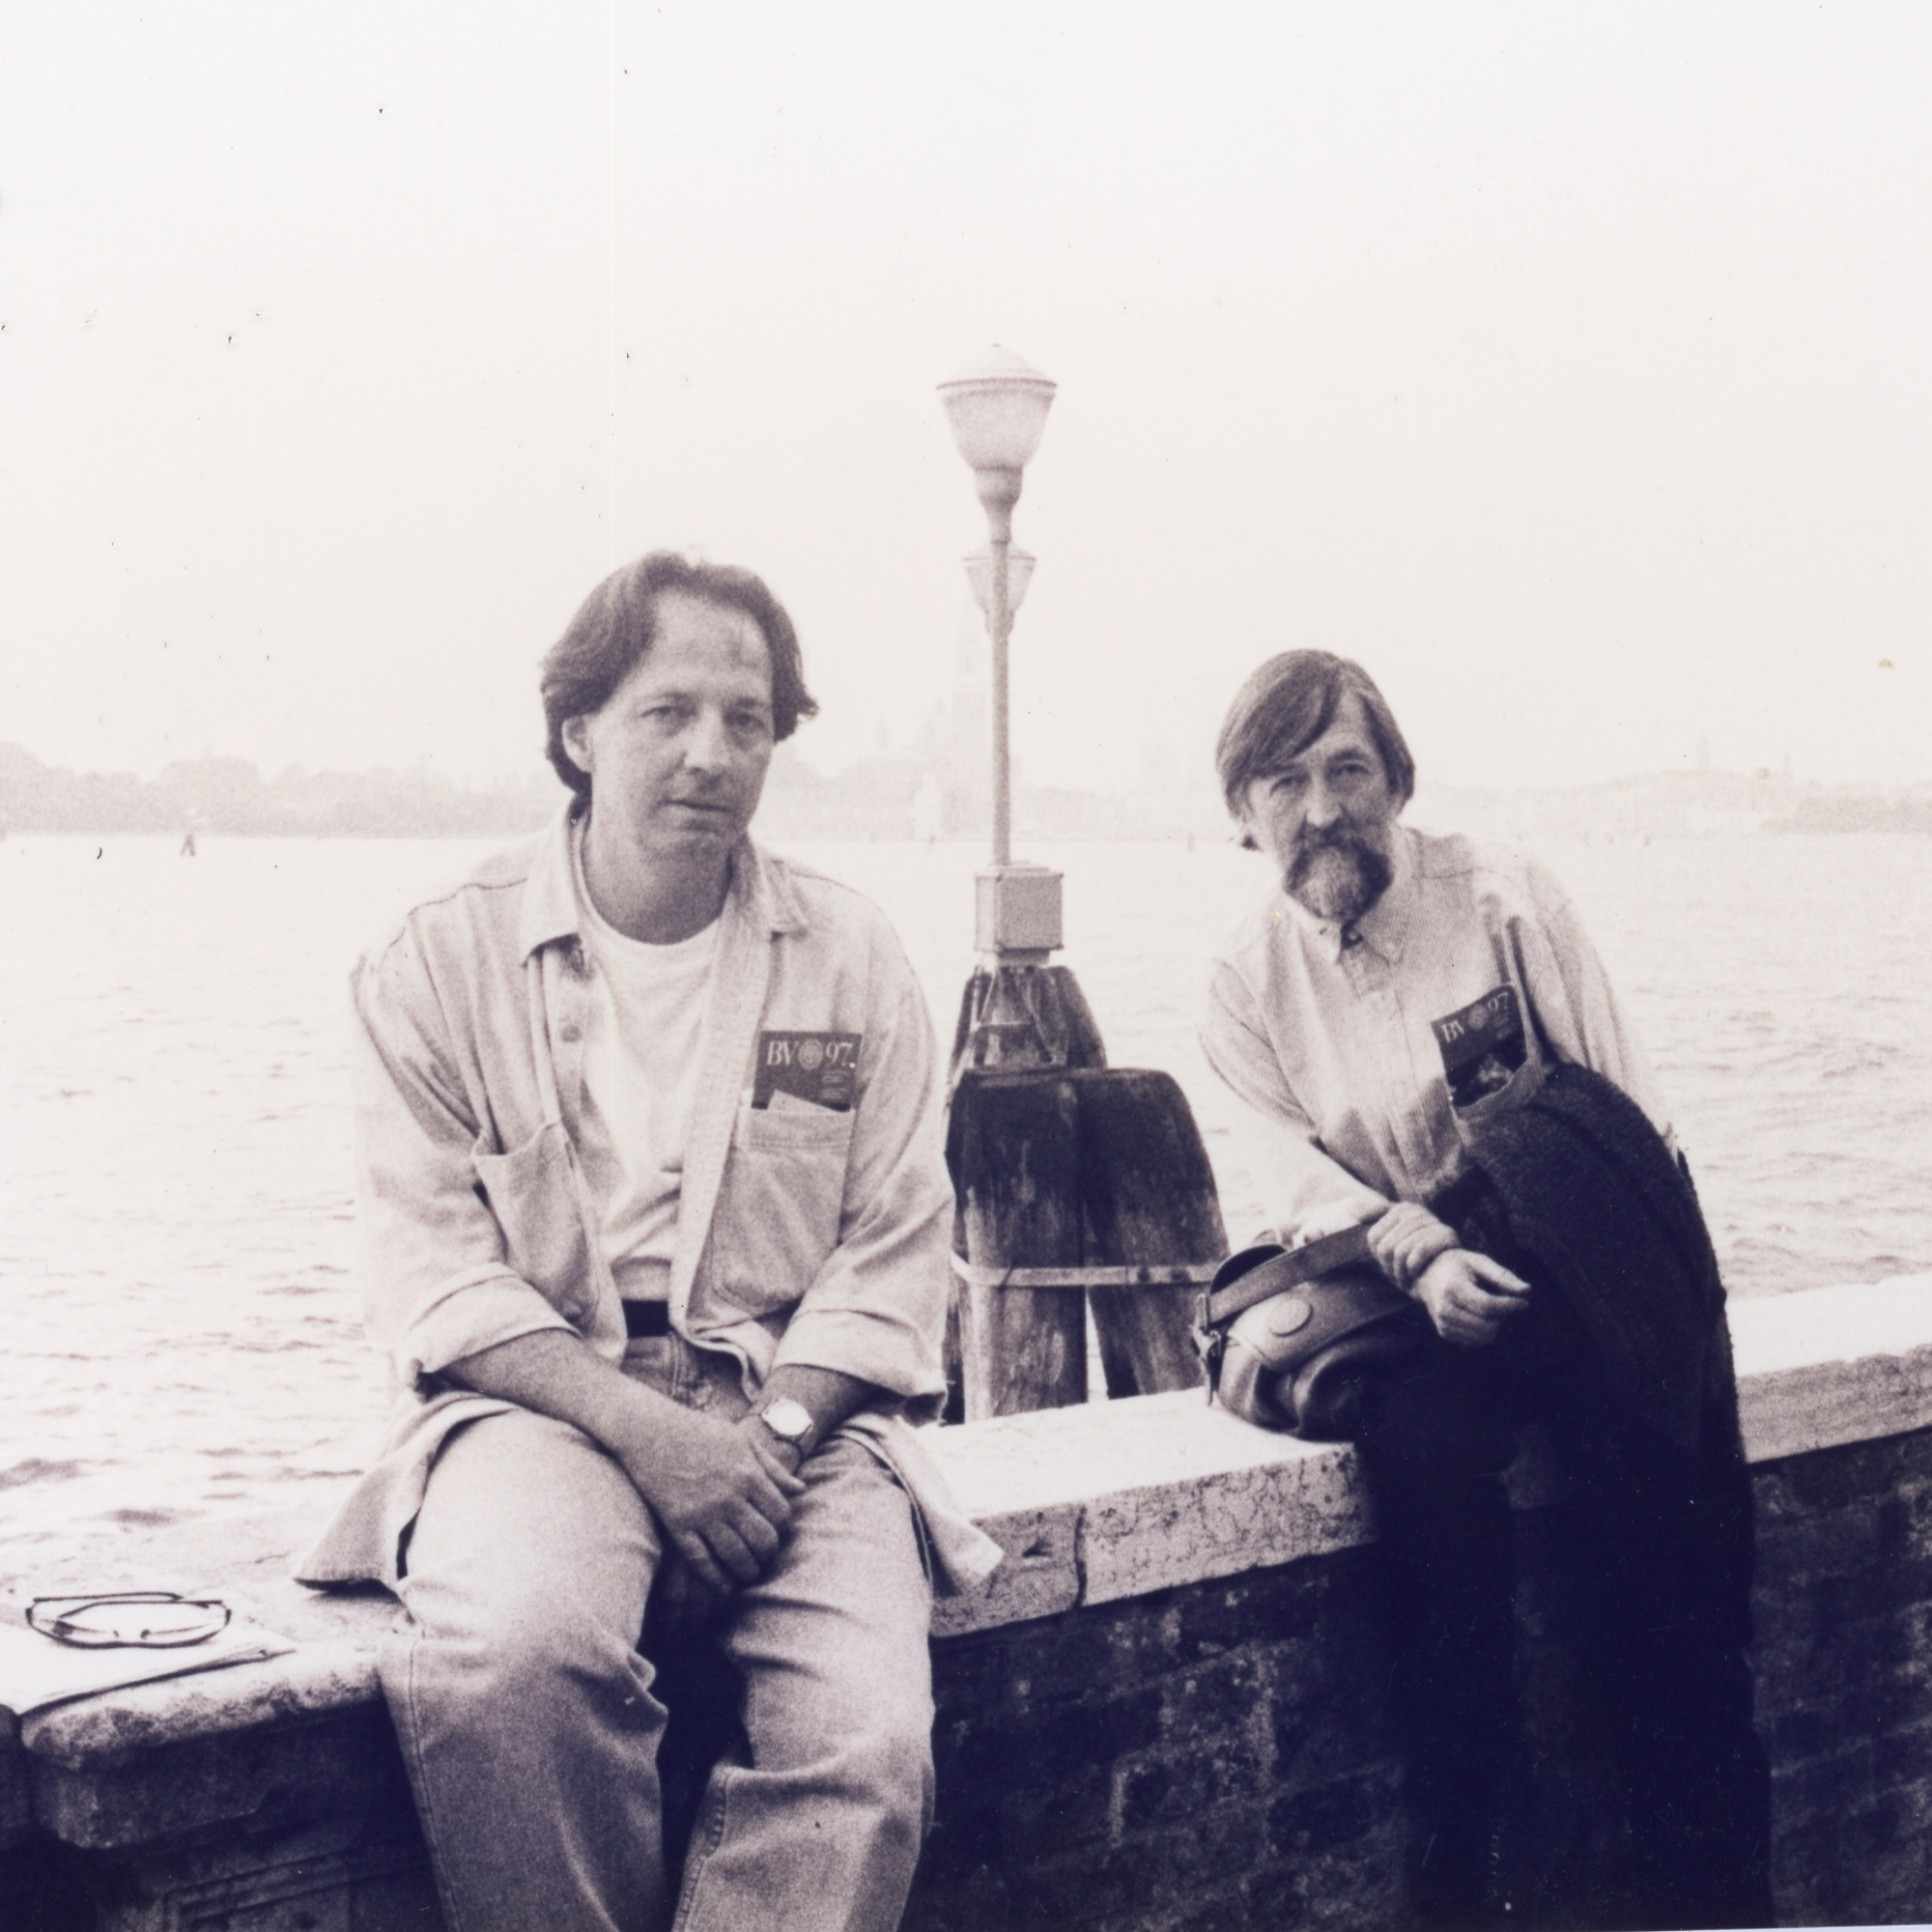 A black and white photo of two men sat on a wall that overlooks a body of water.